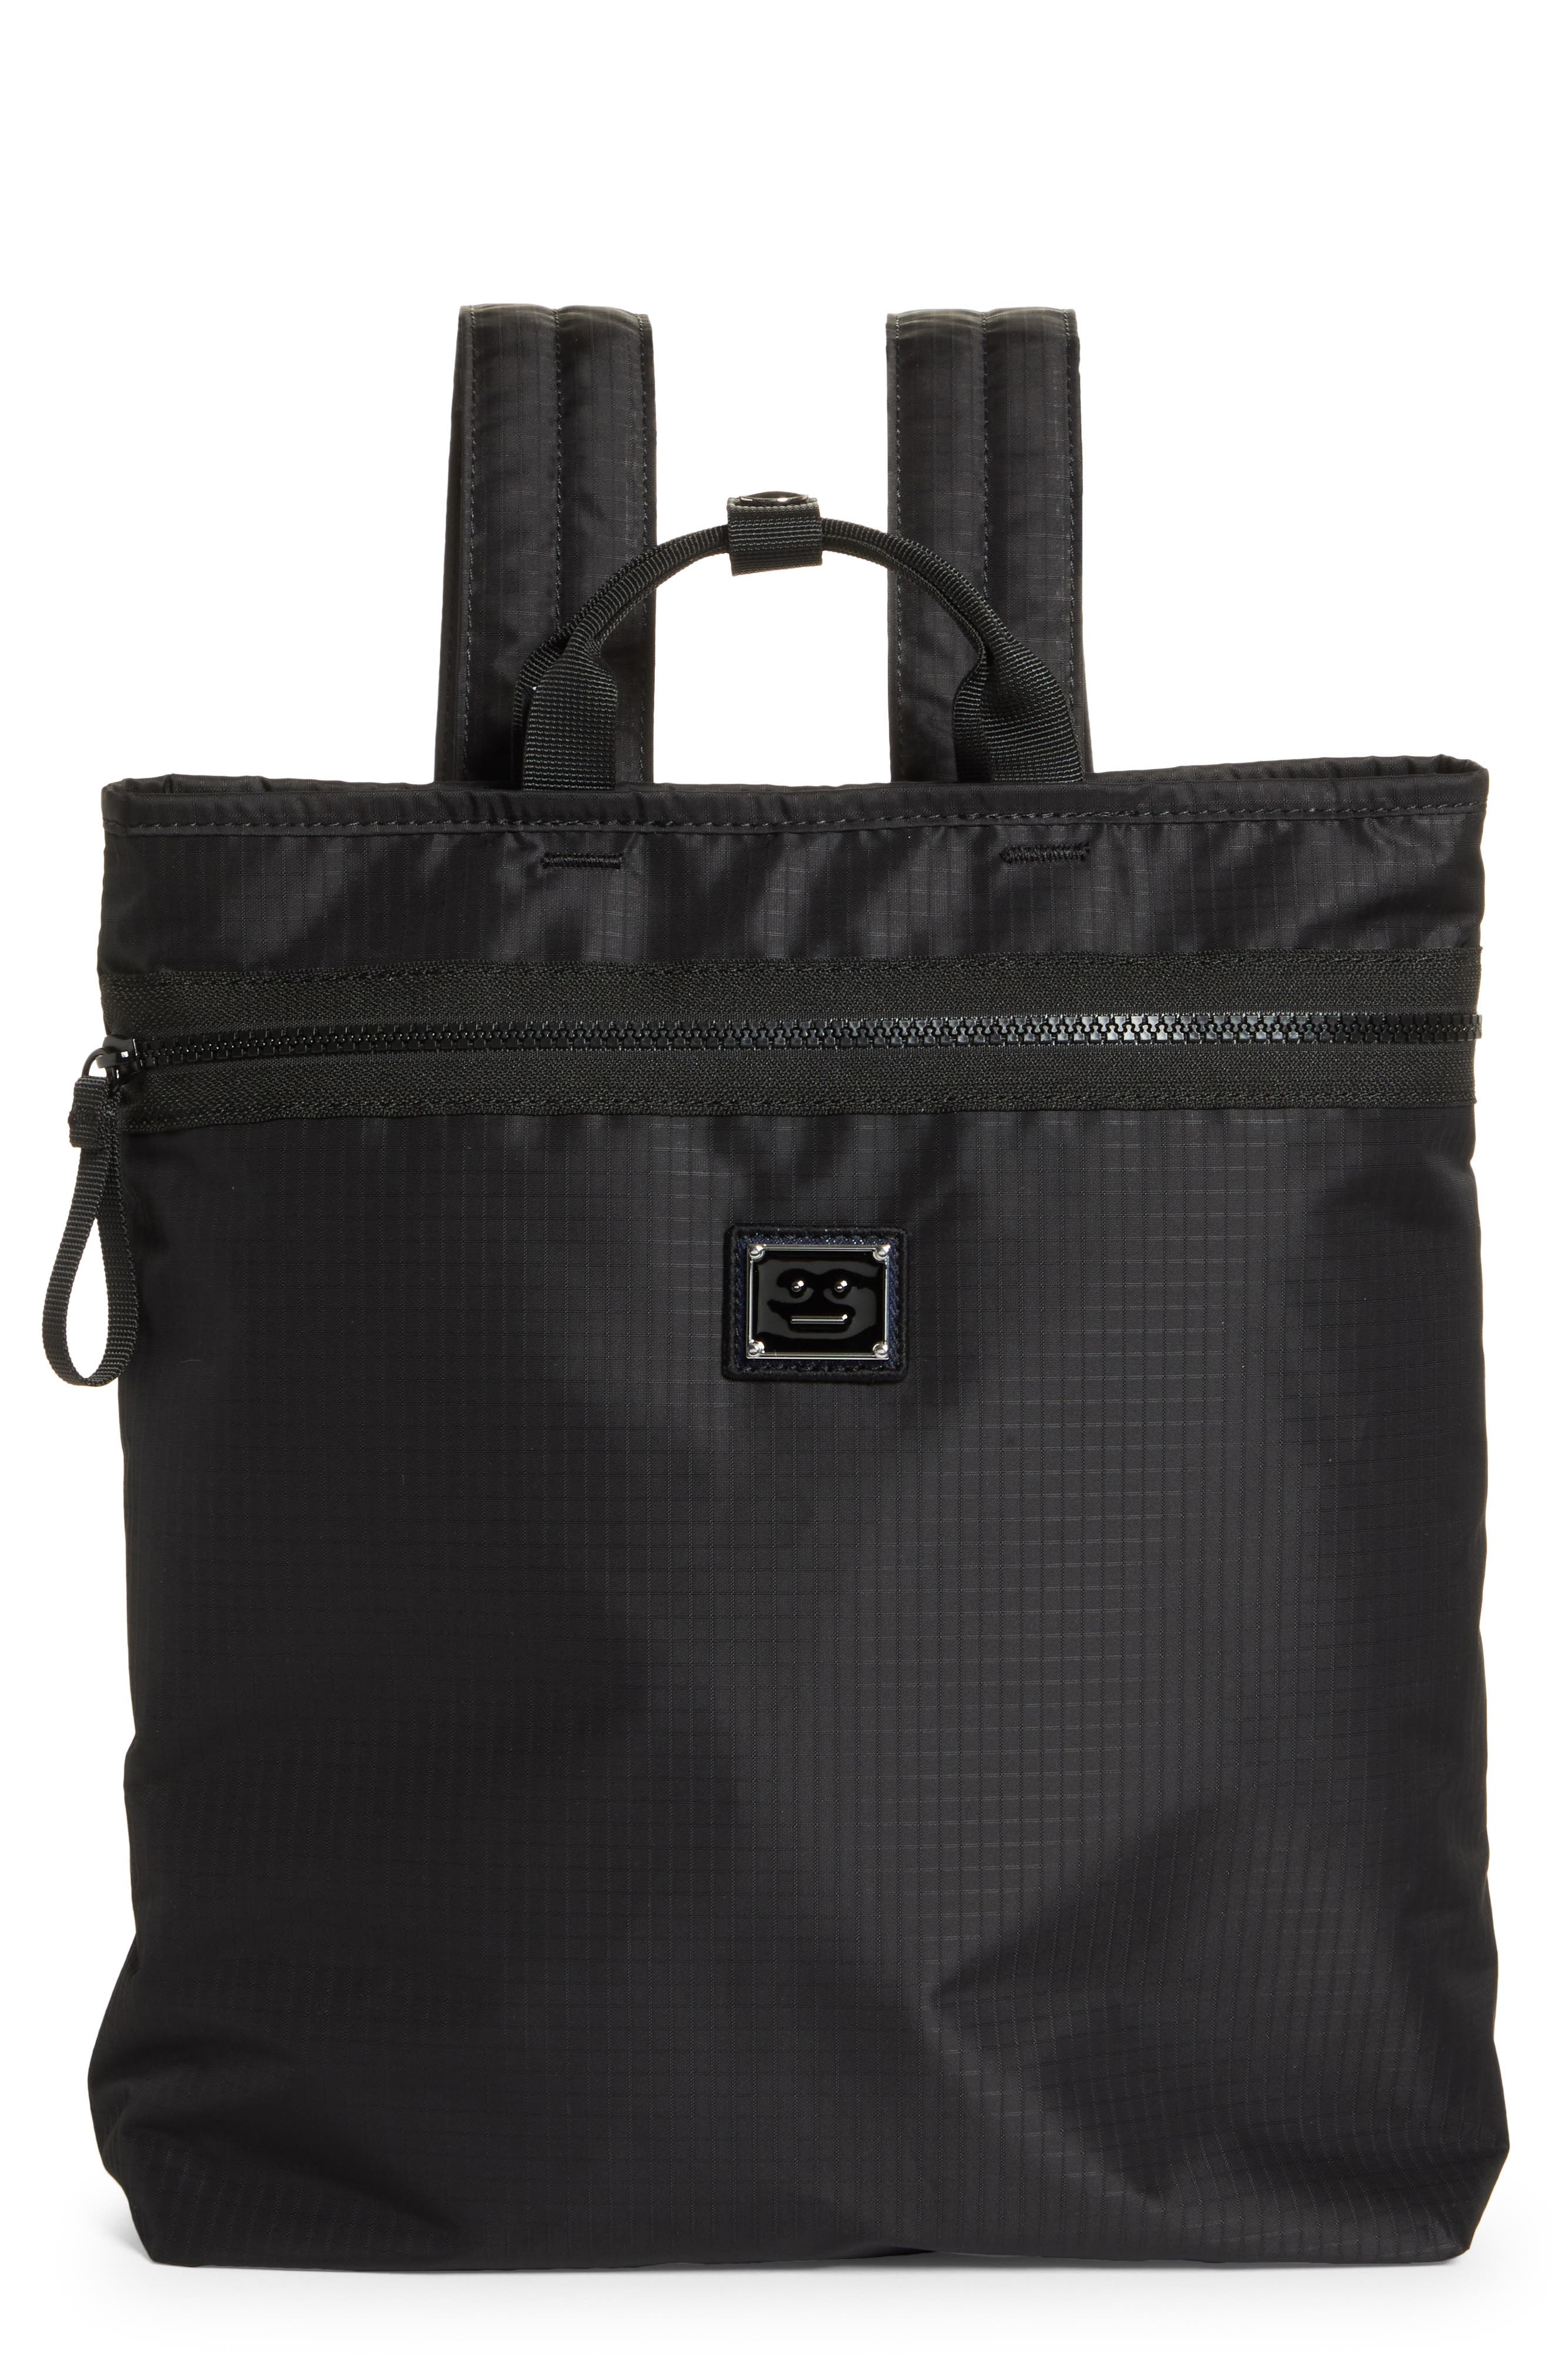 Acne Studios Atton Ripstop Backpack in Black at Nordstrom